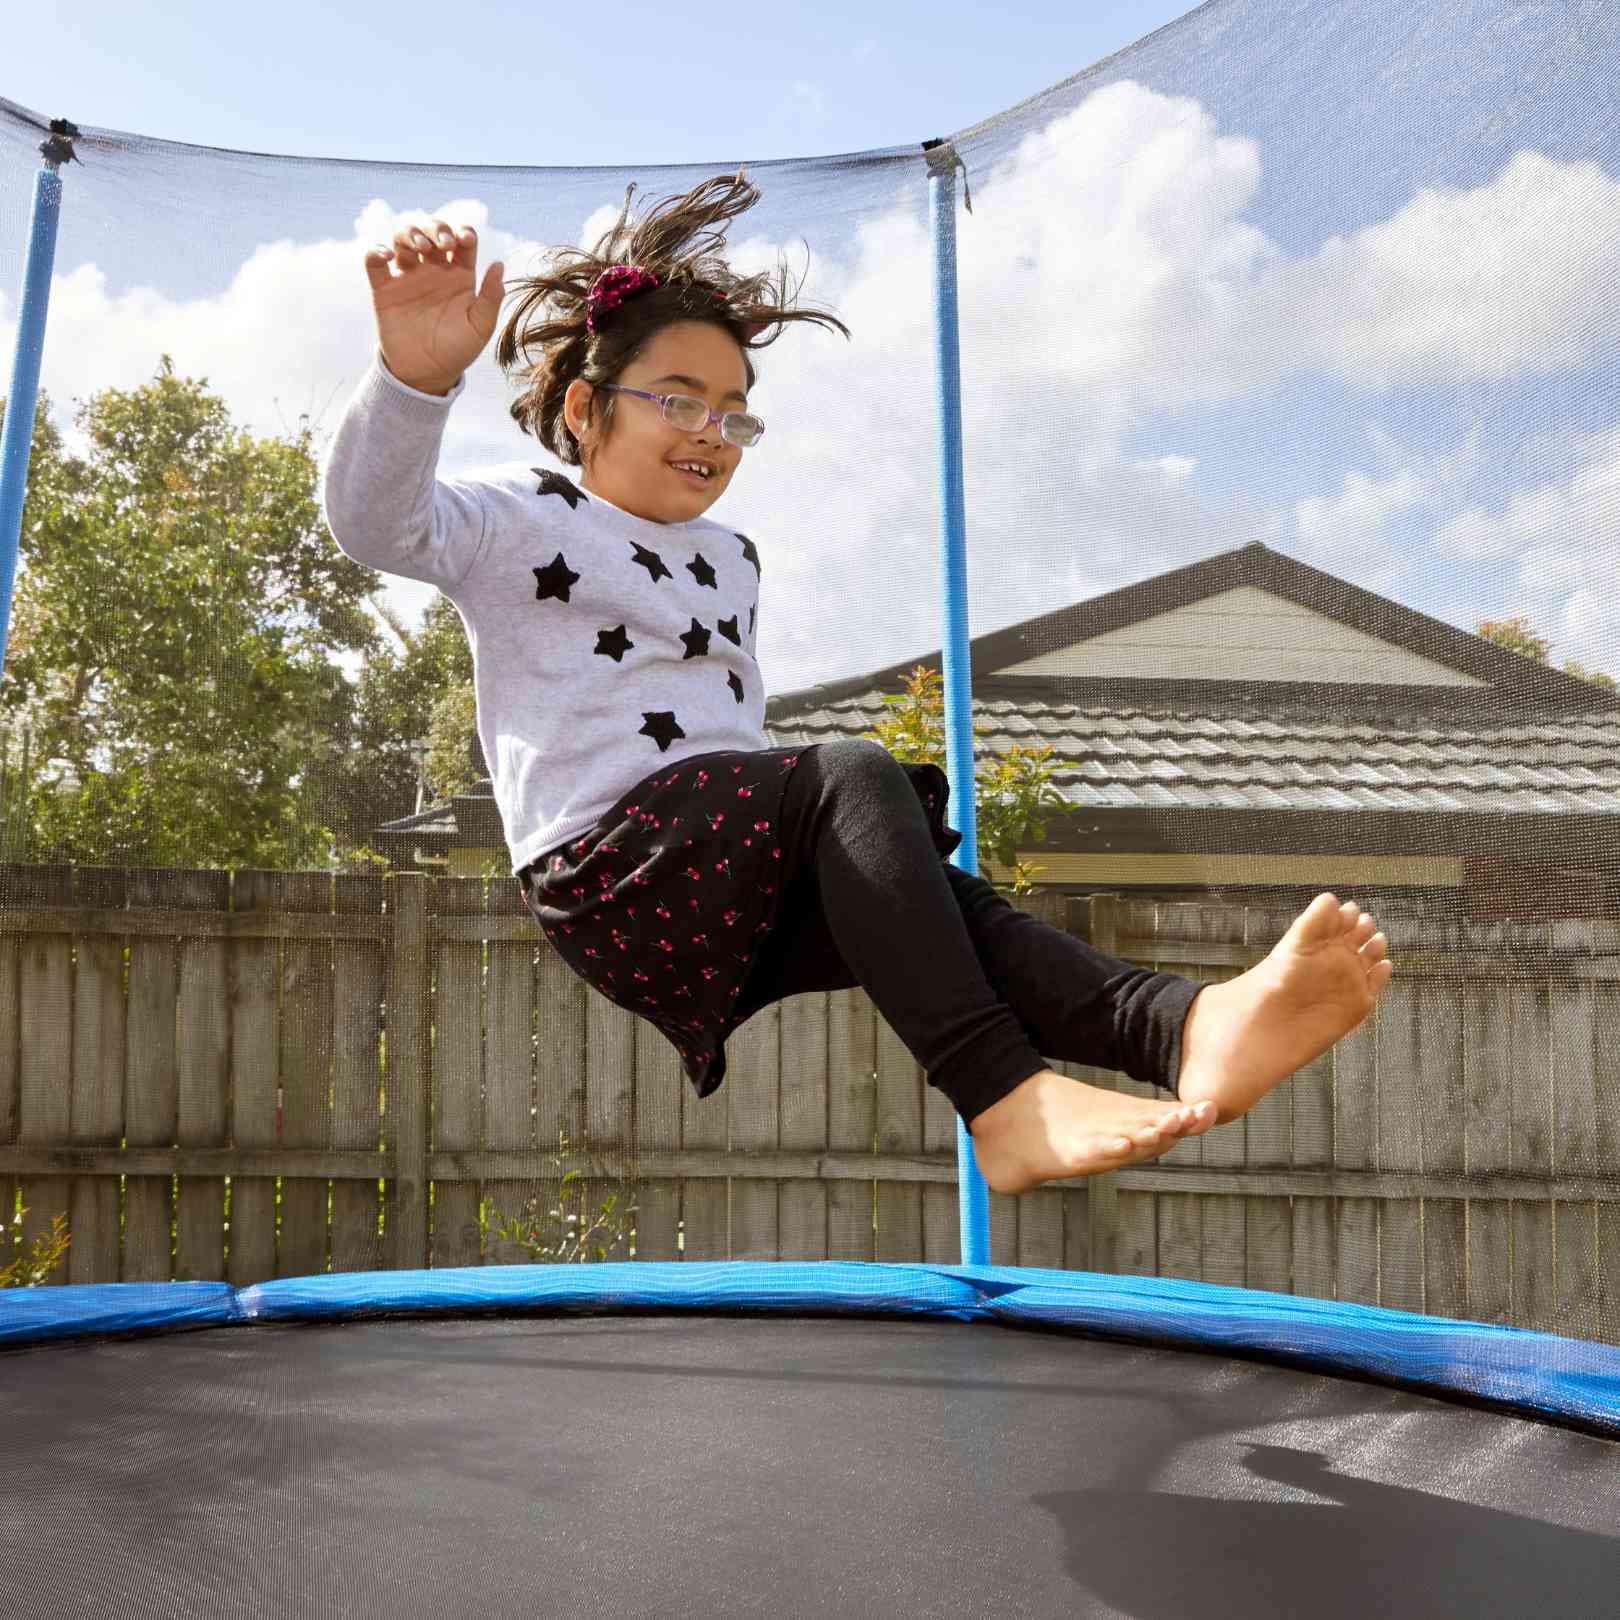 Gifts in Wills. A blind child bouncing on a trampoline